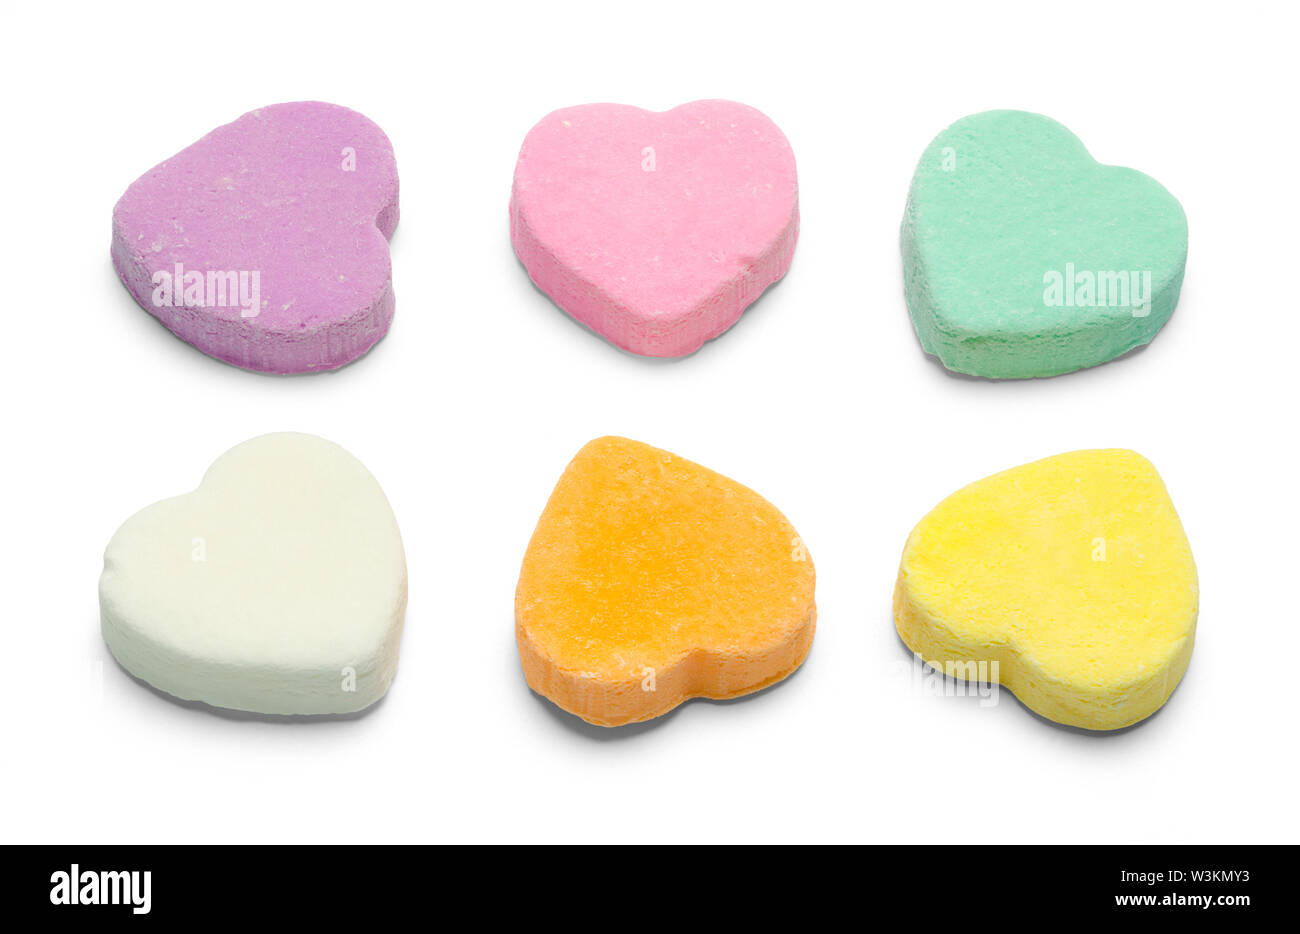 Six Valentines Candy Hearts Isolated on White. Stock Photo